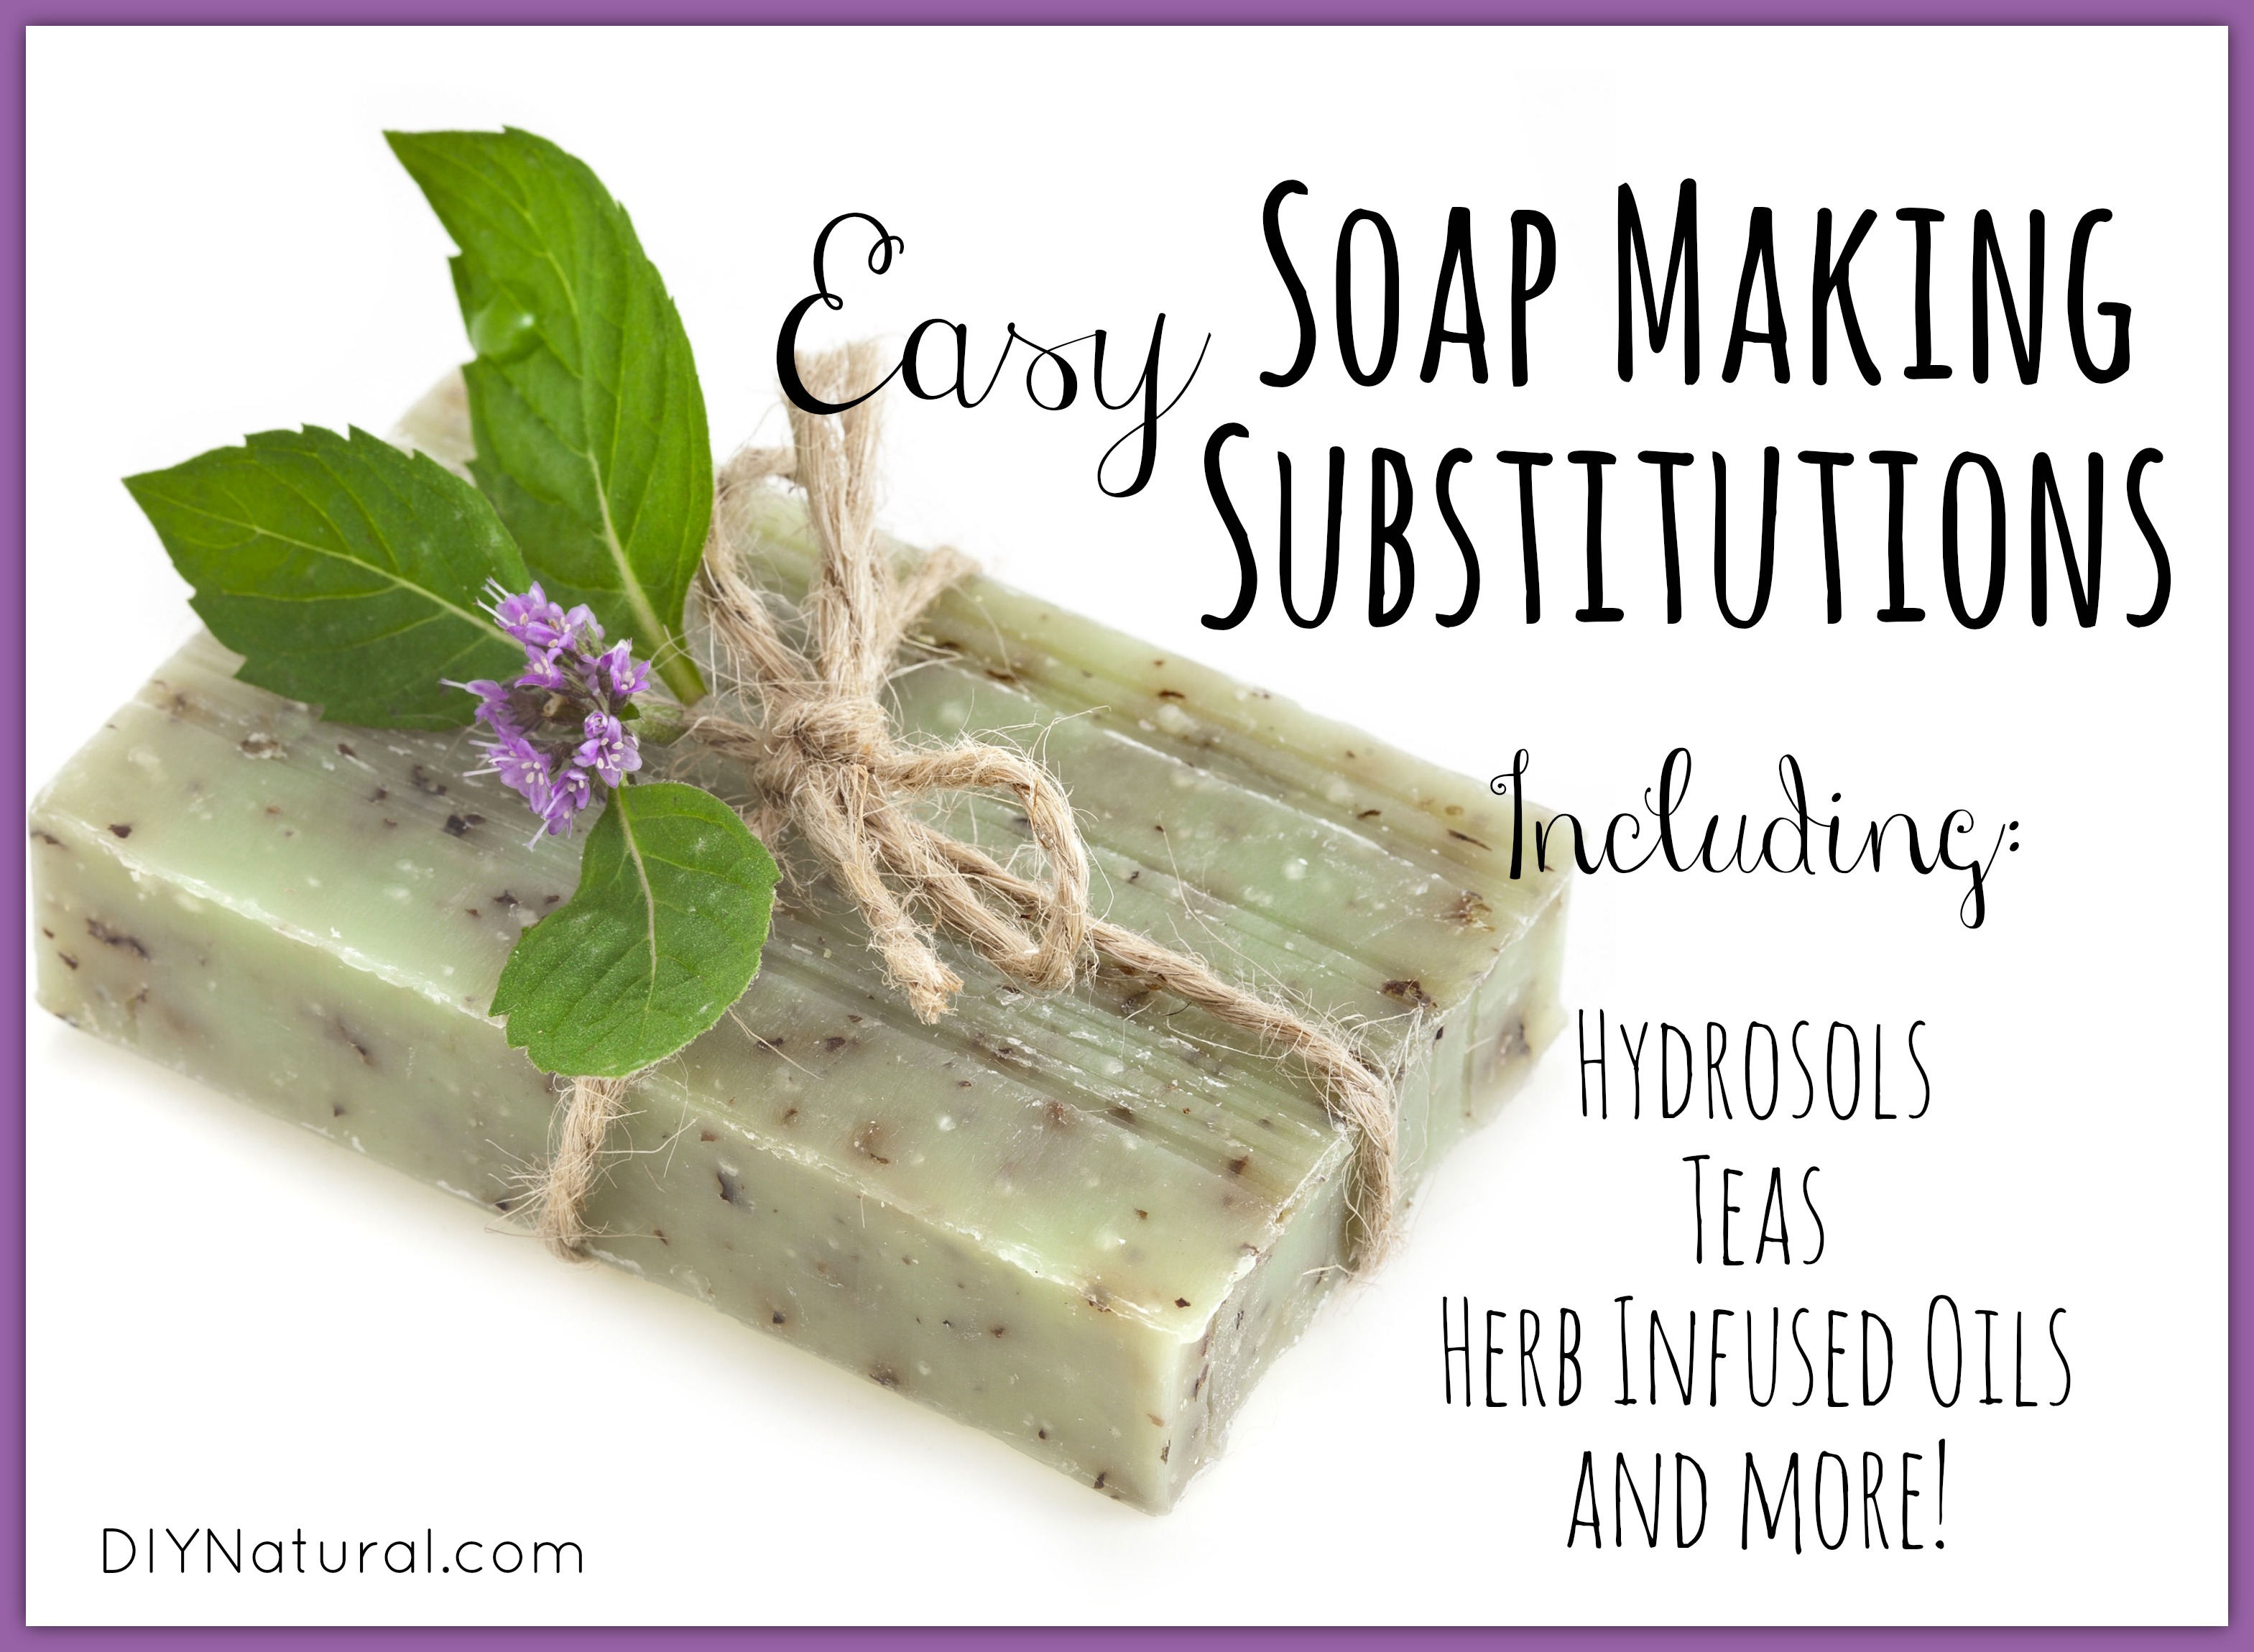 How To Make Soap With Easy Substitutions,Nutty Irishman Drink Dutch Bros